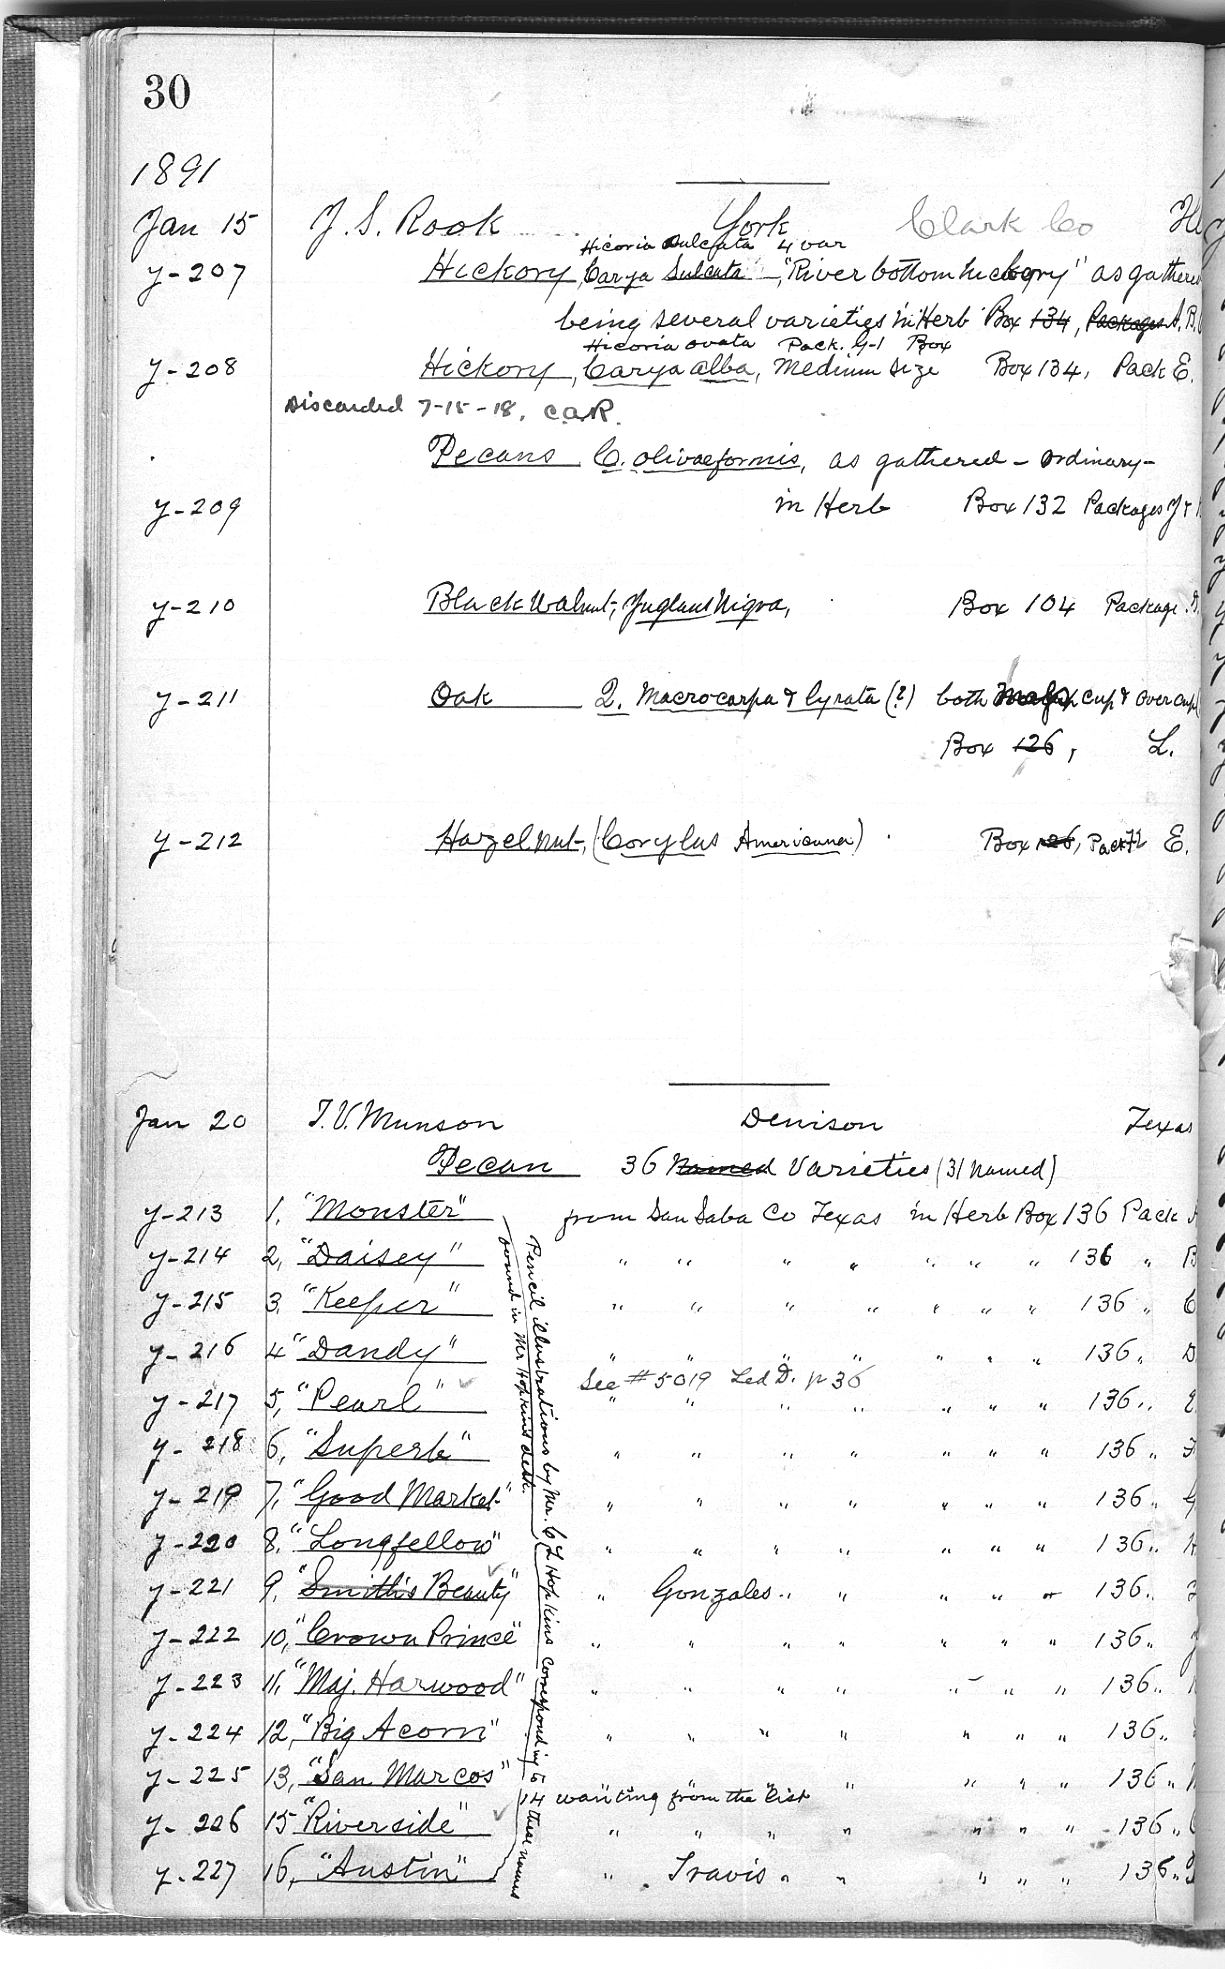 Logbook entry from 1891 from USDA